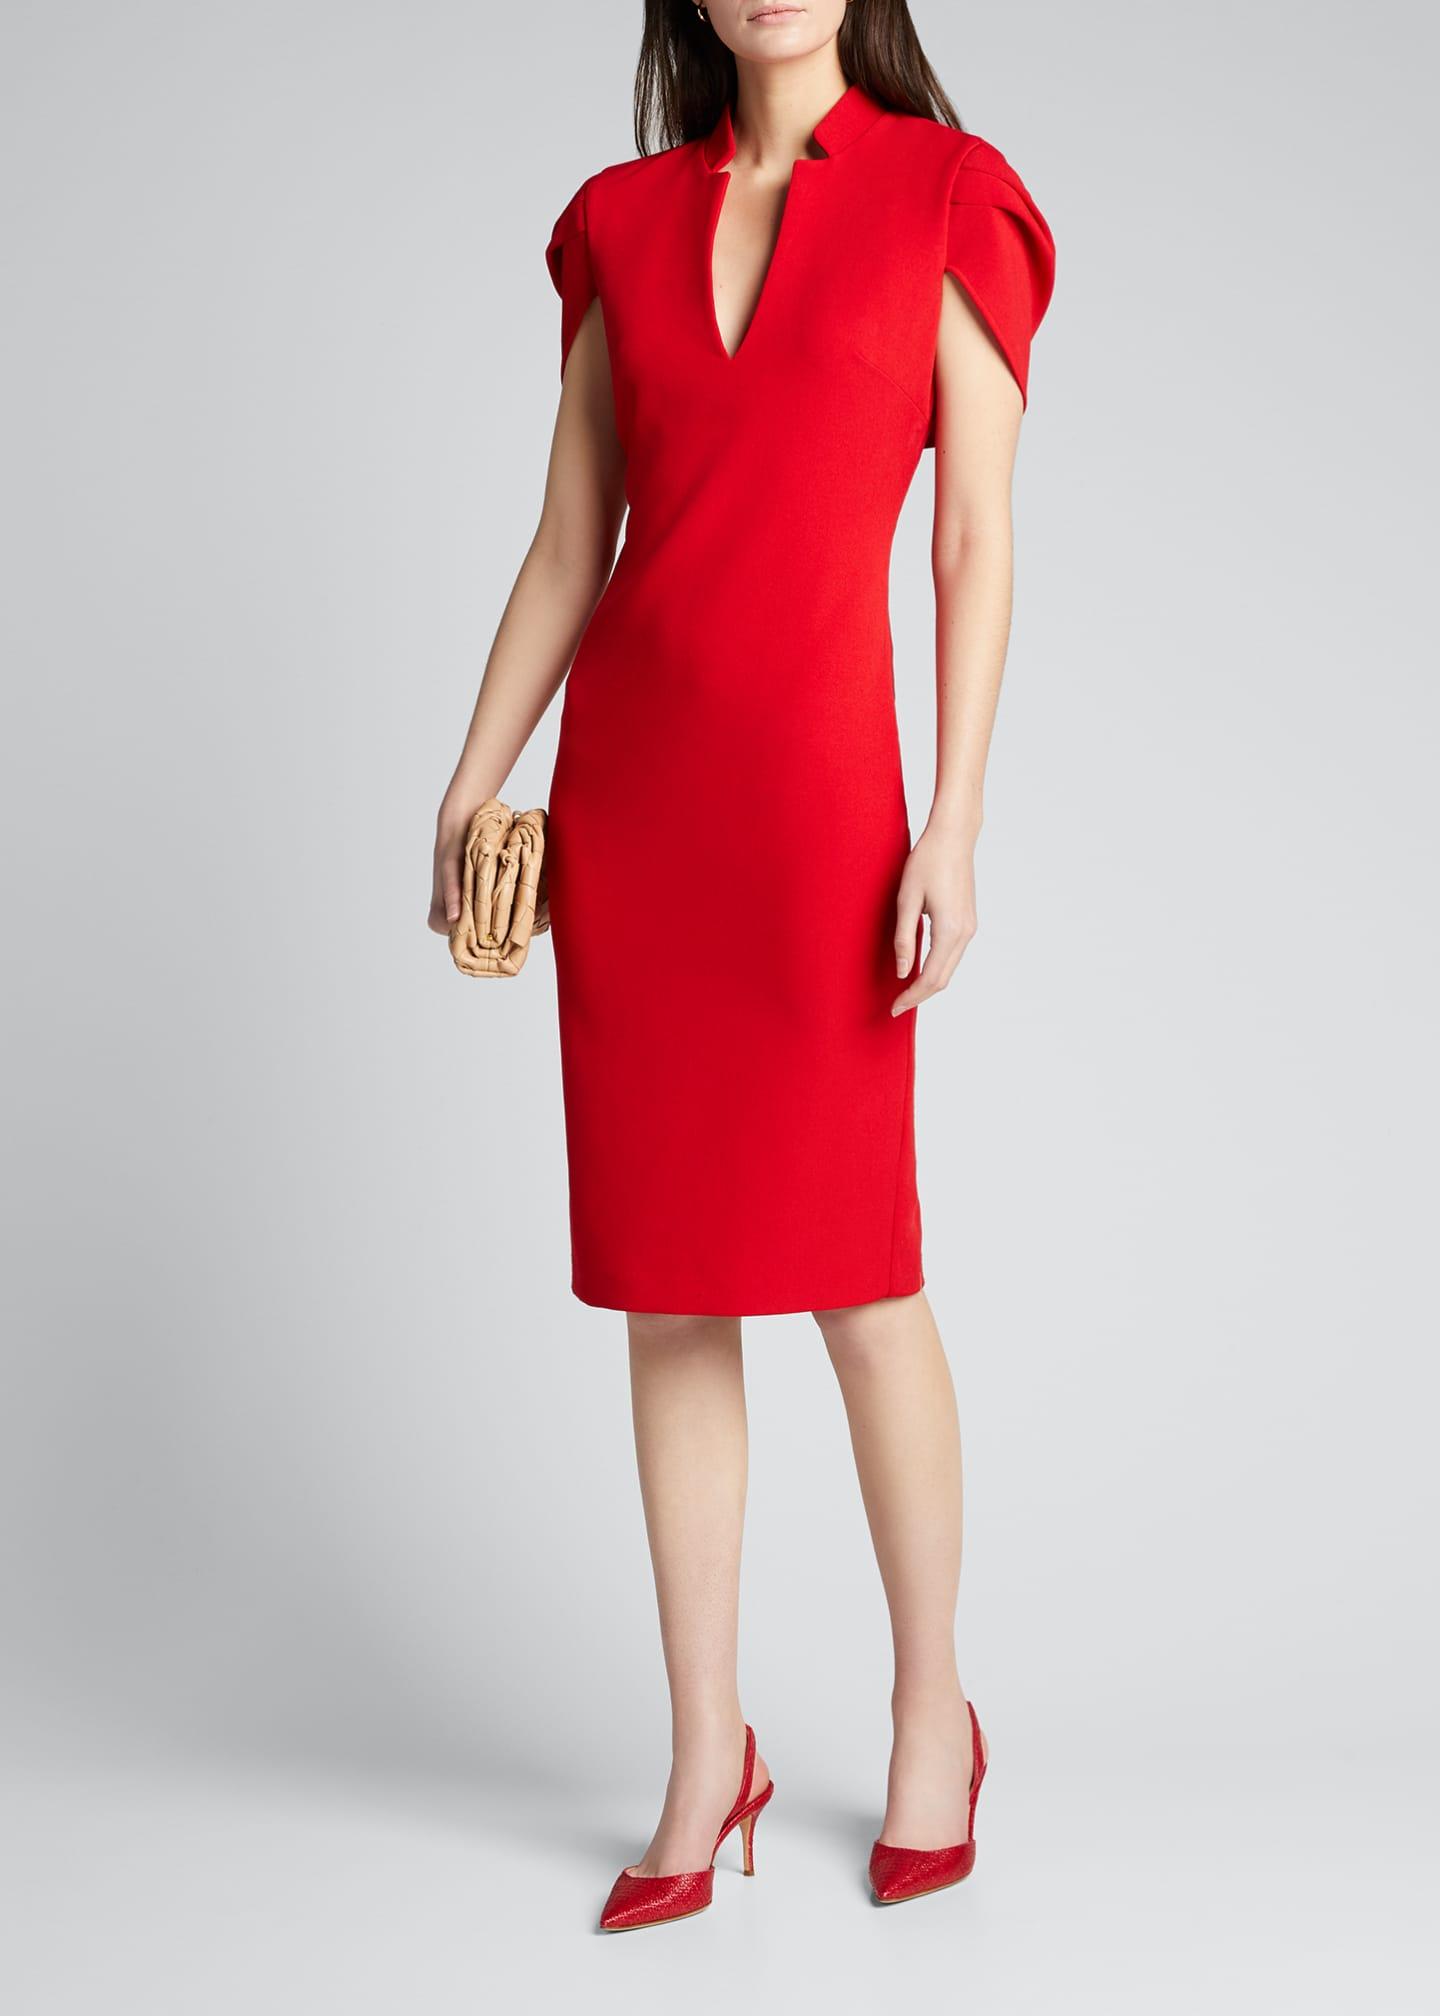 Badgley Mischka Synthetic V-neck Cape Cocktail Dress in Red - Lyst